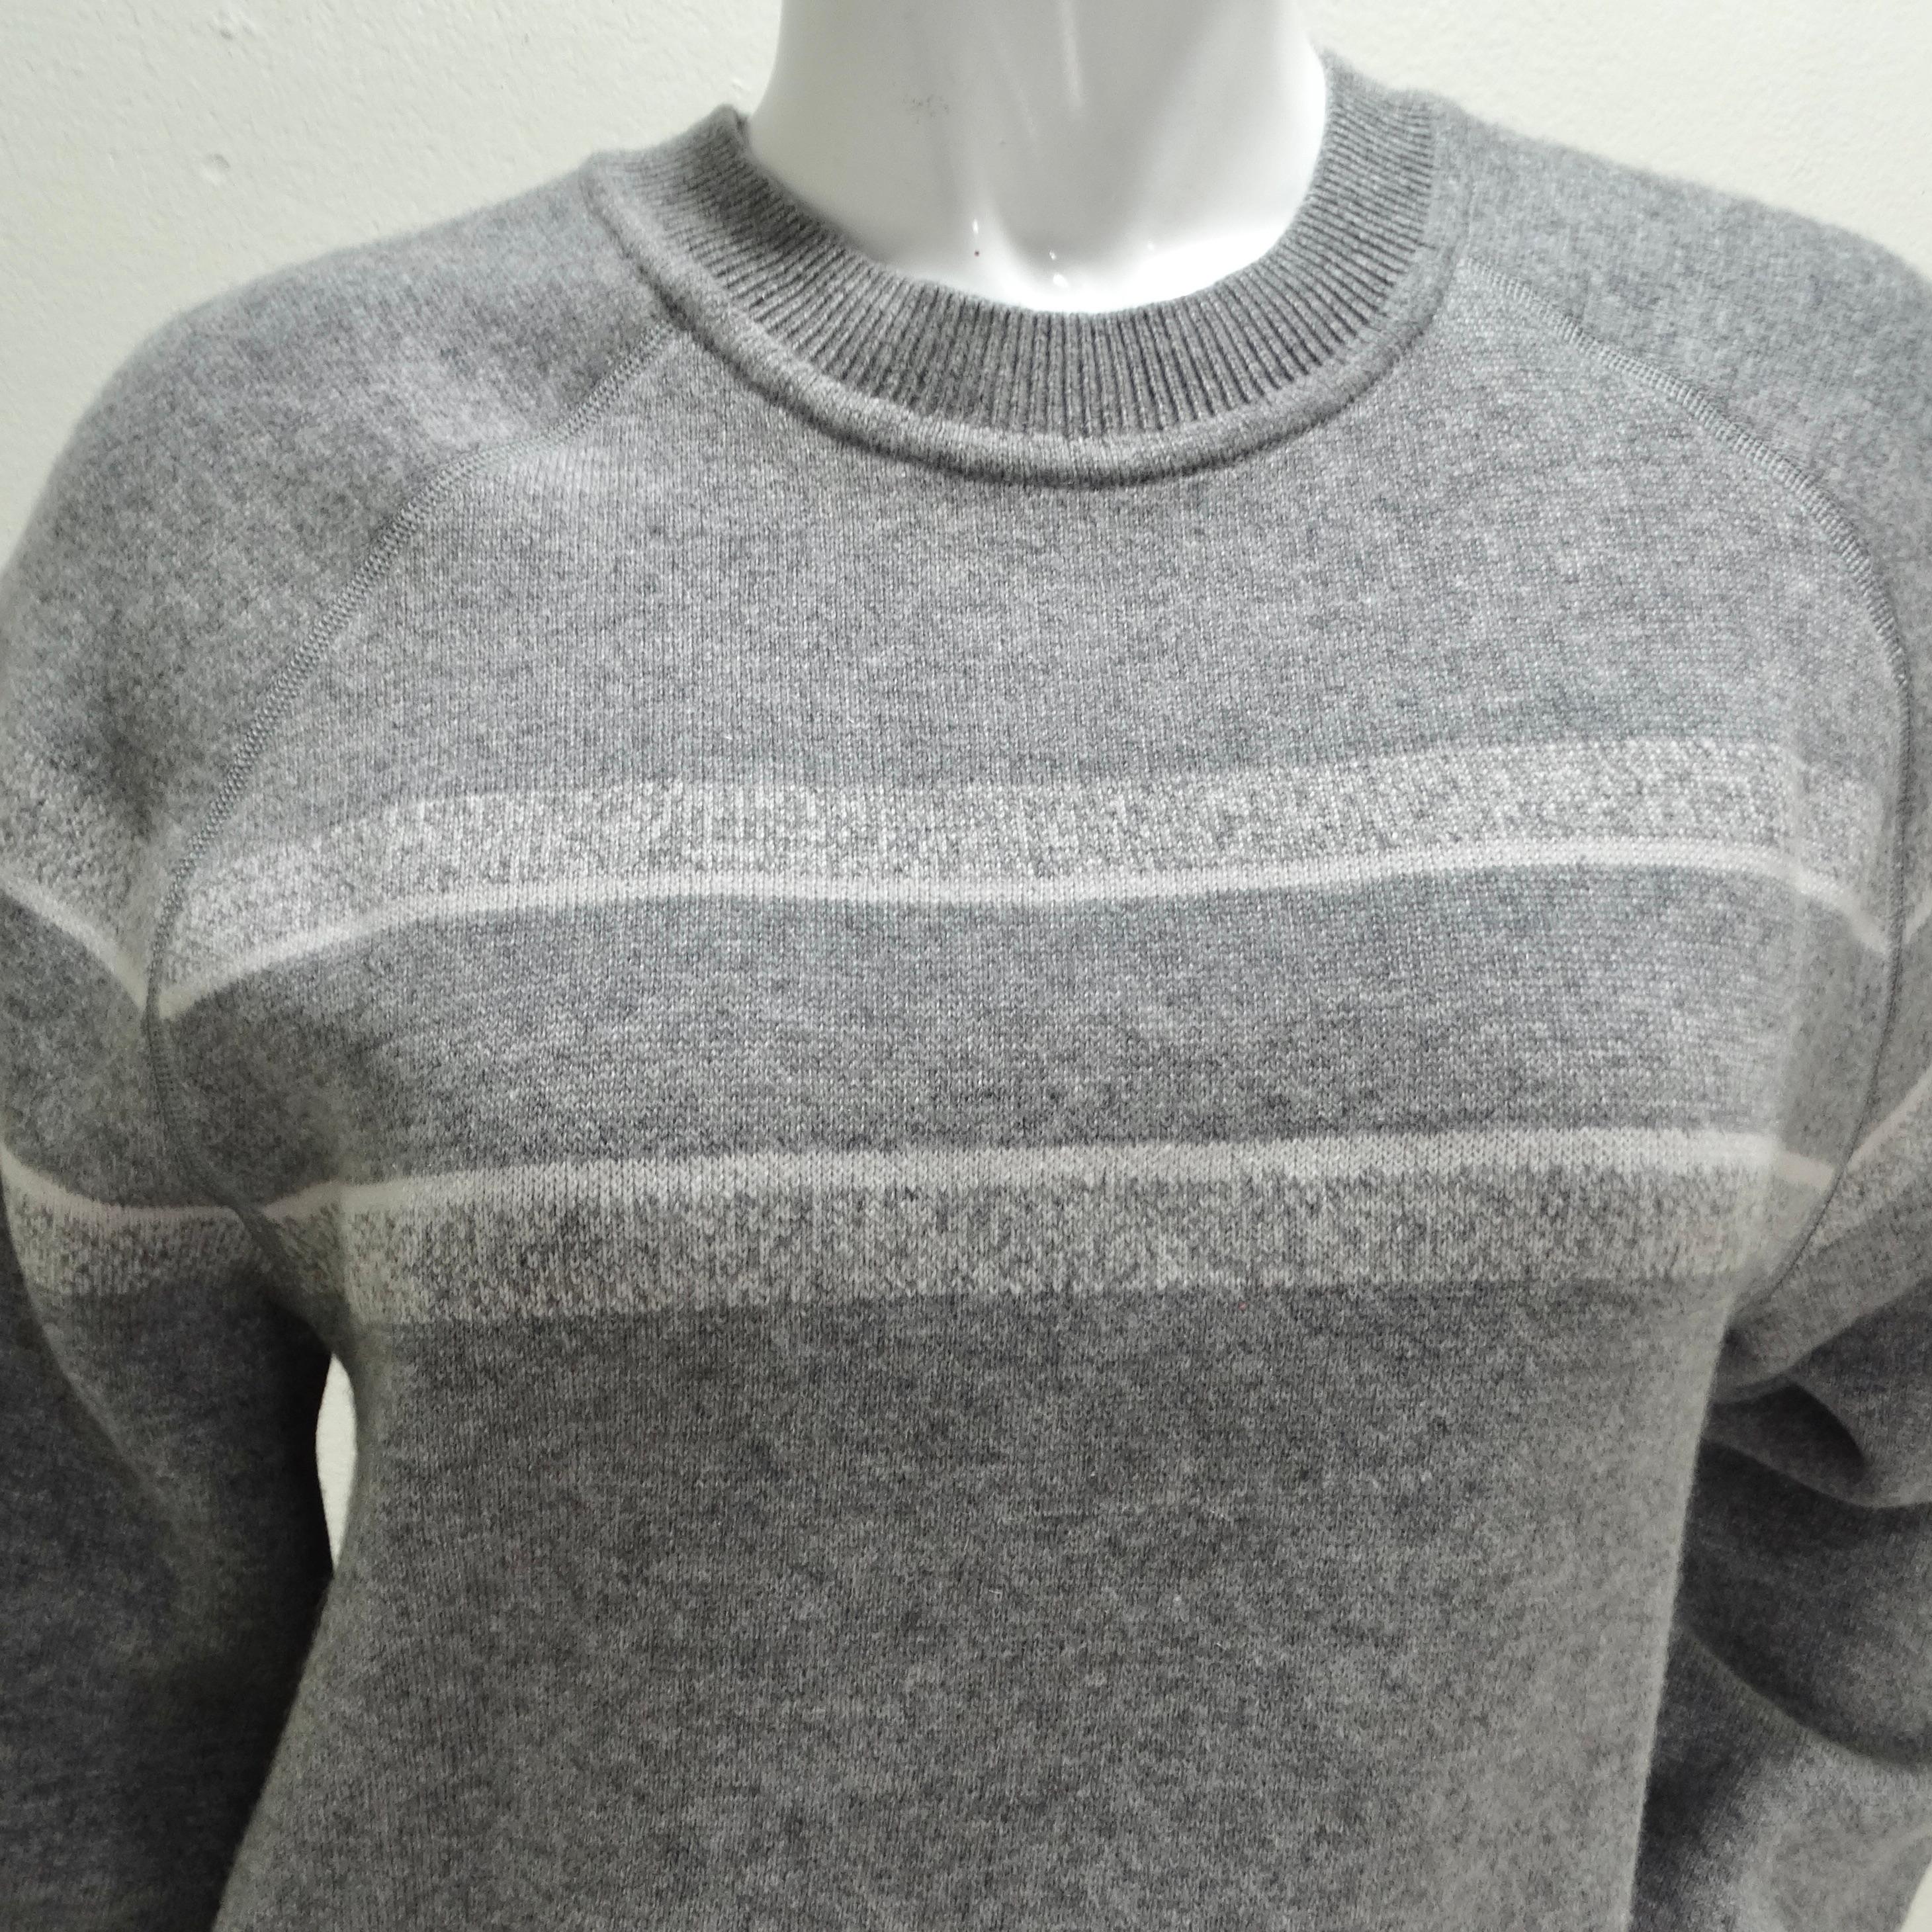 Wrap yourself in opulence with the Christian Dior Oblique Reversible Cashmere Knit Sweater. This oversized, cozy crew neck sweater, crafted from the most luxurious thick cashmere elastane blend, ensures unparalleled comfort. The standout design